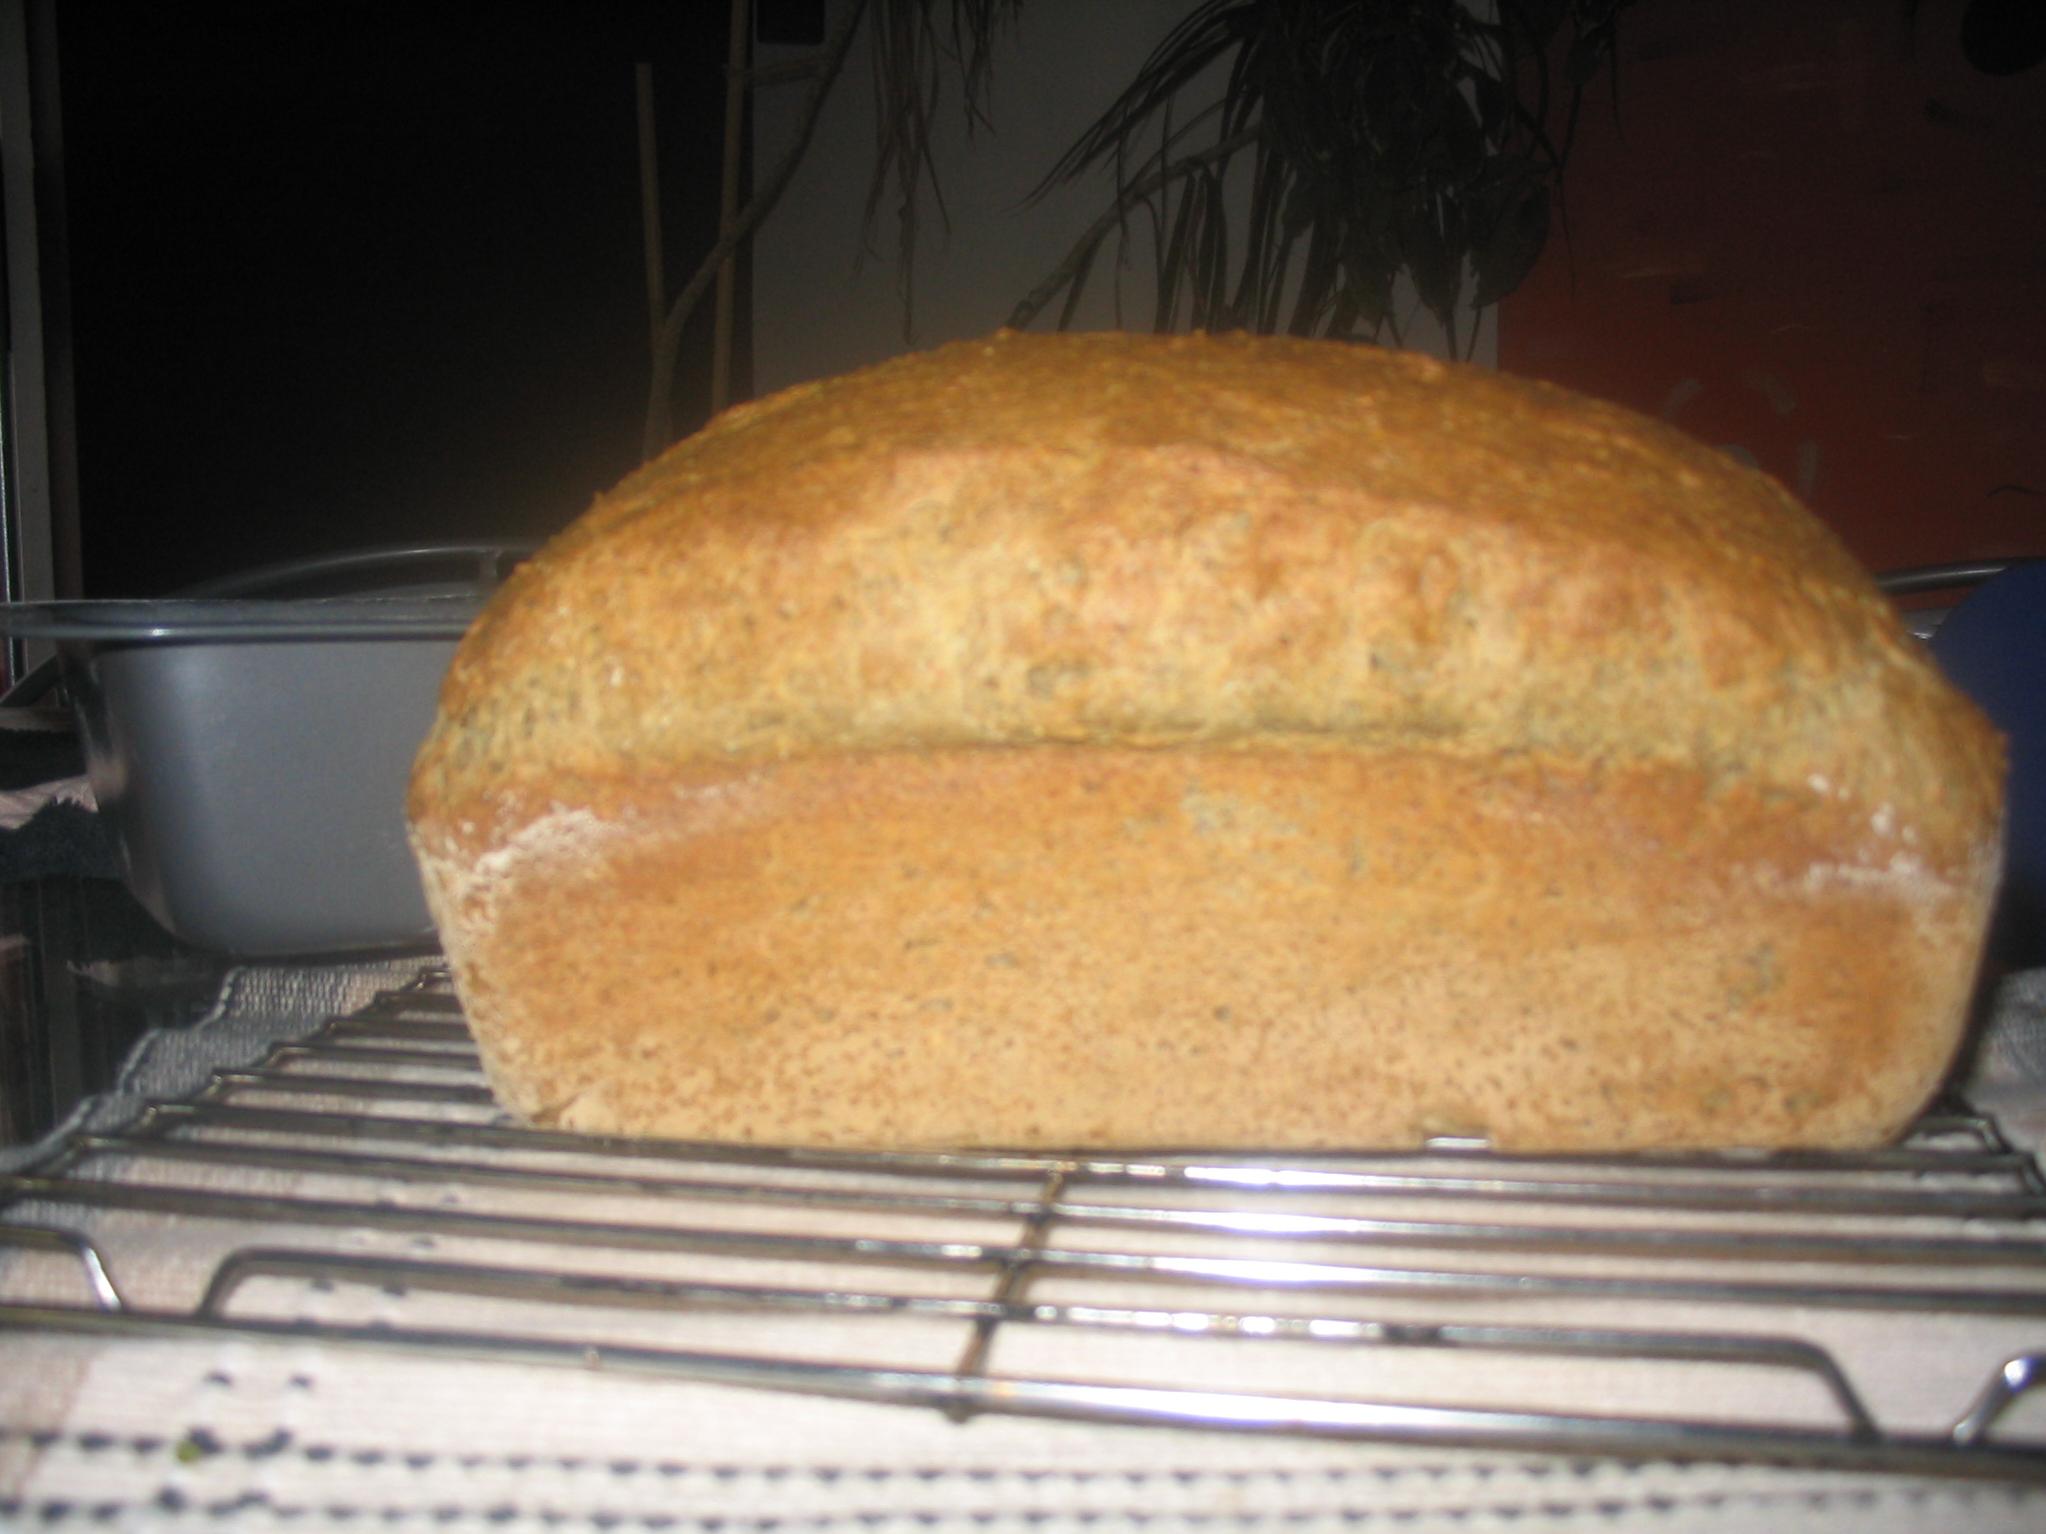  A hearty loaf of gluten free 5 grain bread straight out of the oven.